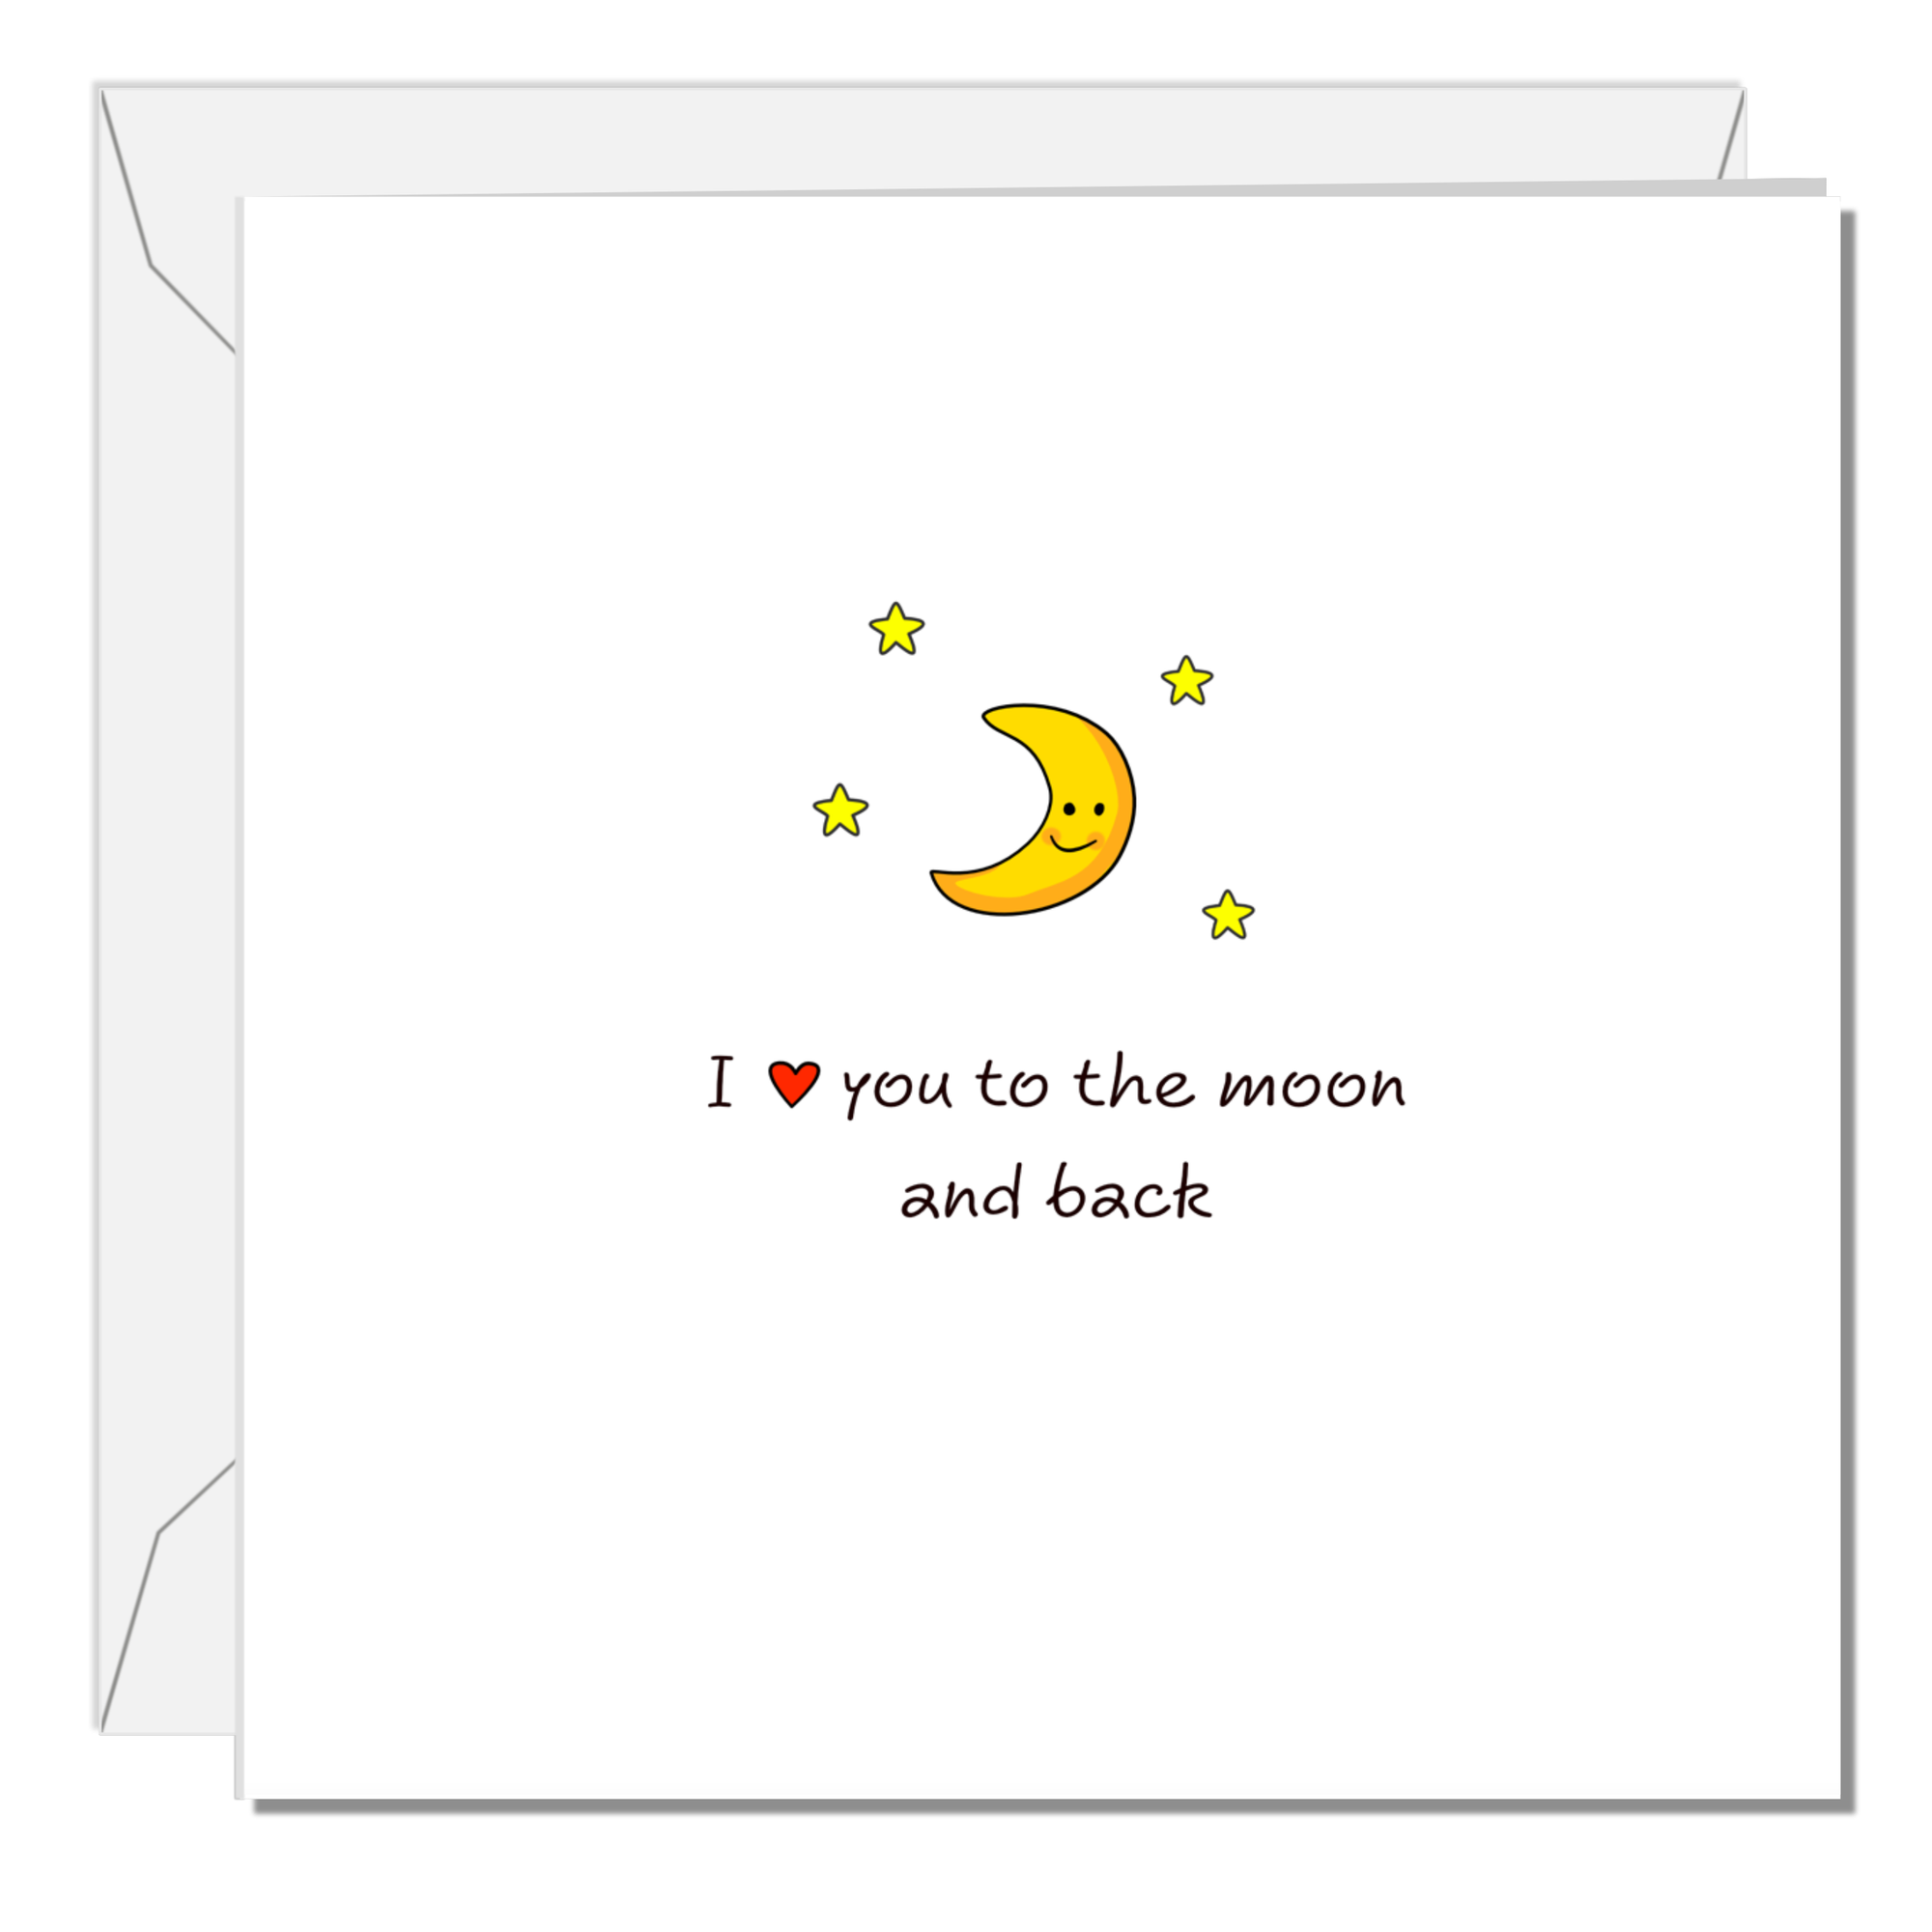 Romantic Anniversary Card / Valentines / Engagement / Wedding Card - I love you to the moon & back - best boyfriend girlfriend wife husband